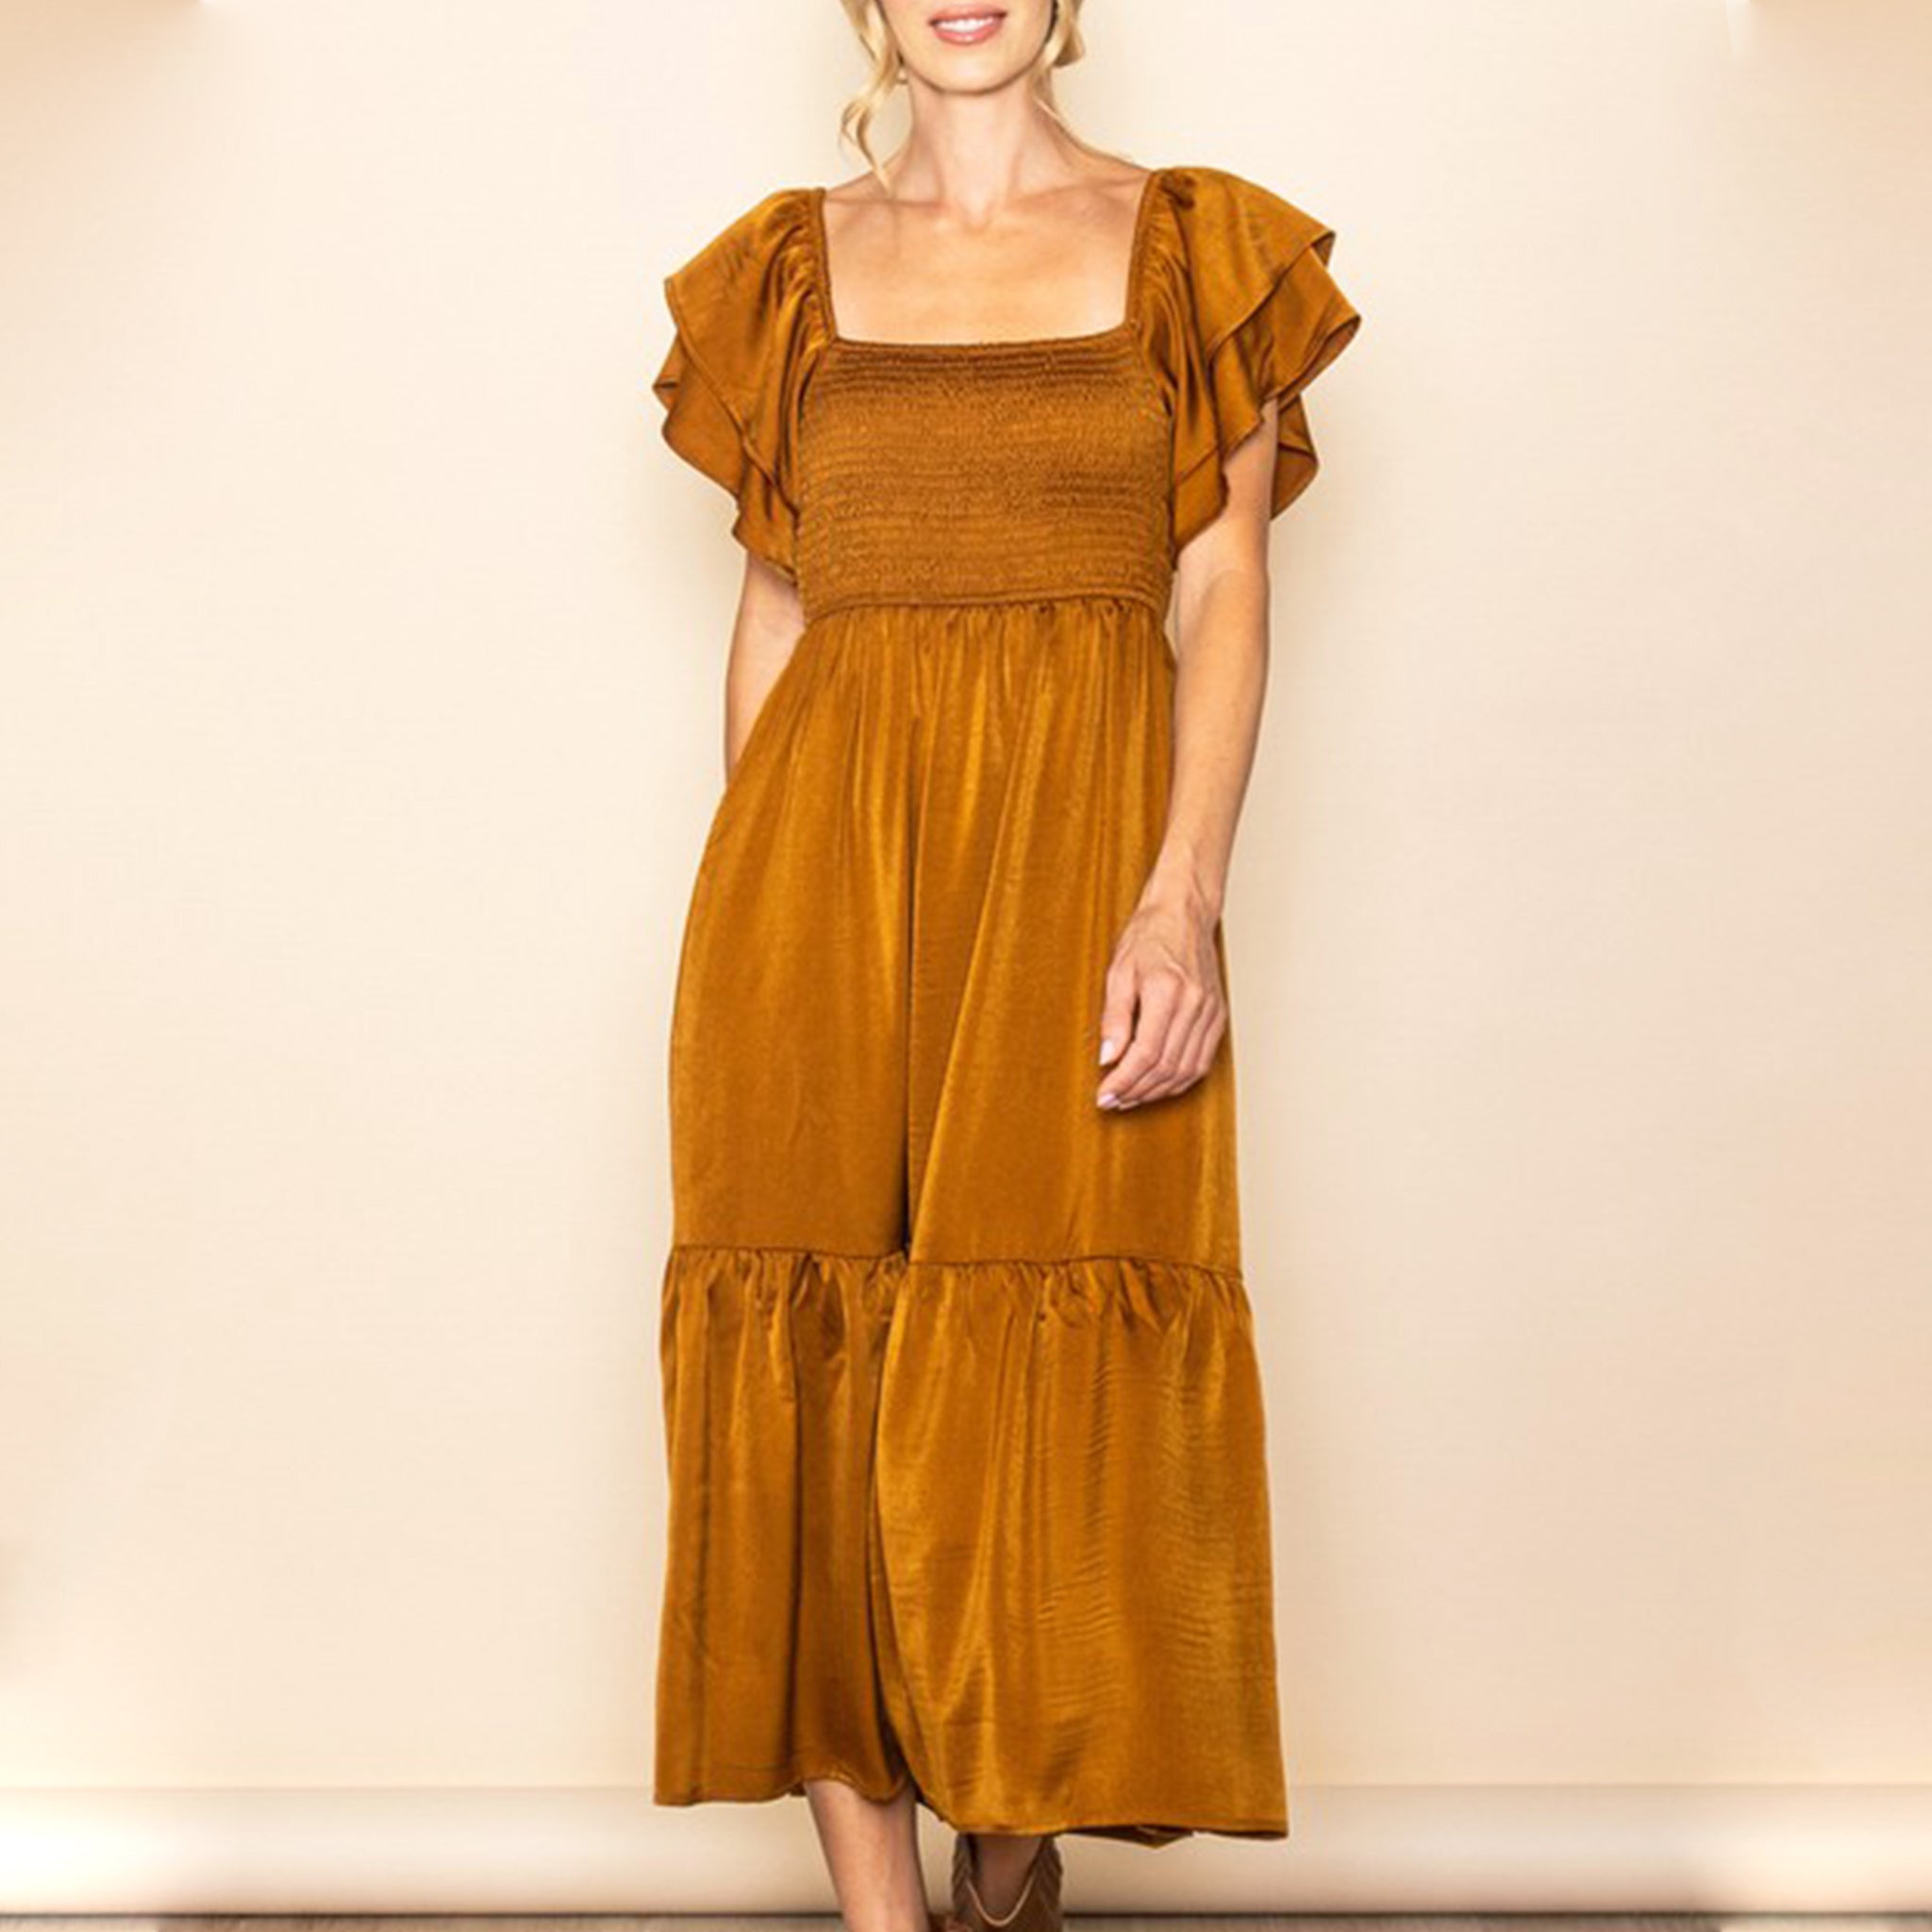 A copper satin dress with a smocked bodice, flutter sleeves and a tiered skirt bottom. 